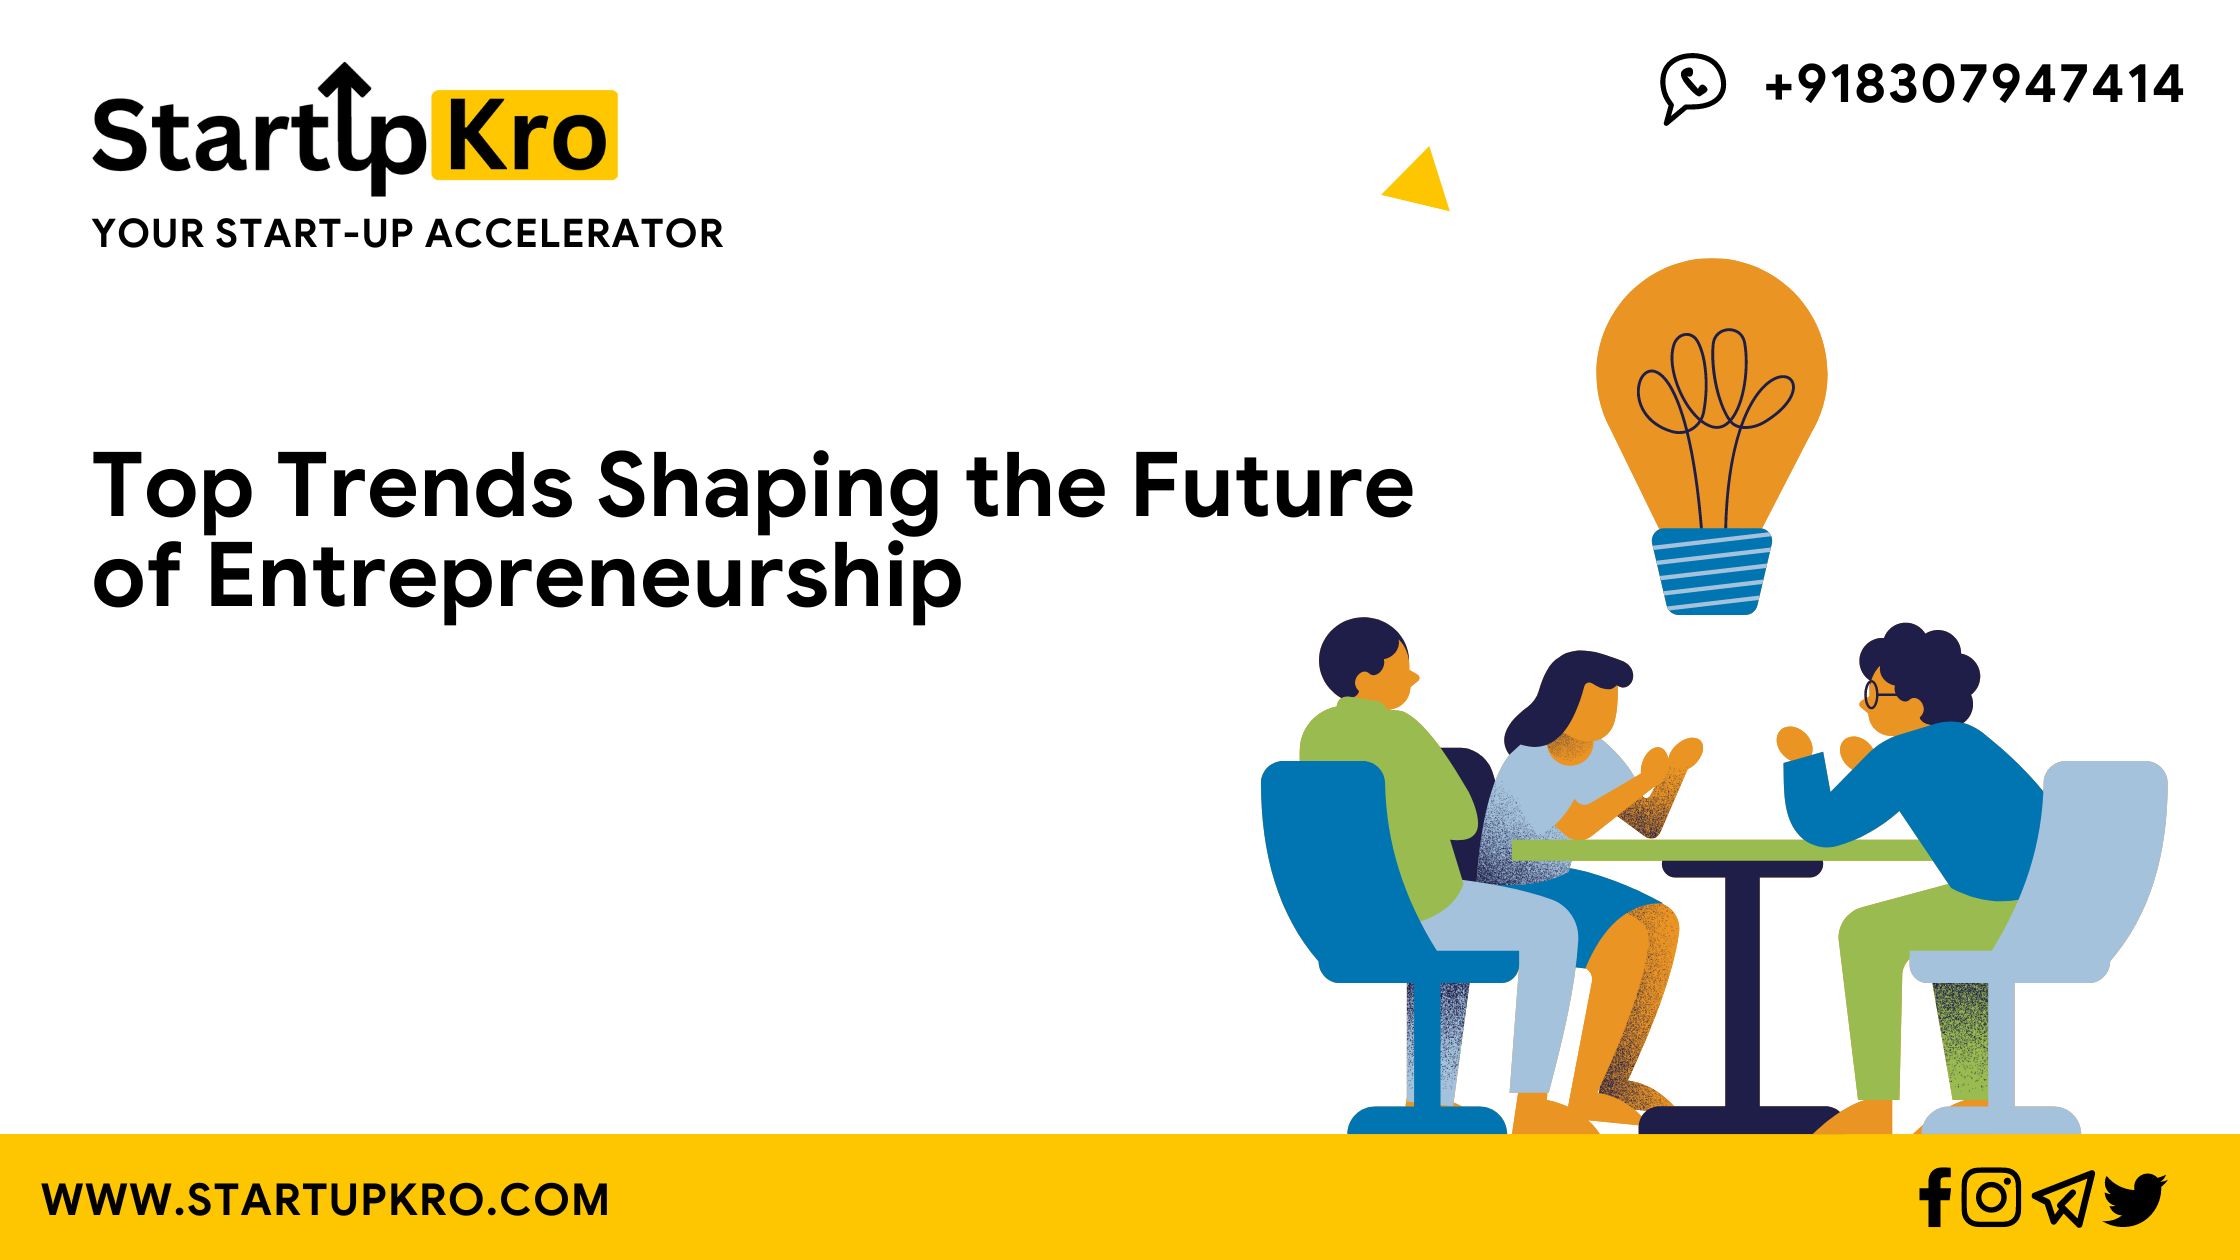 Top Trends Shaping the Future of Entrepreneurship